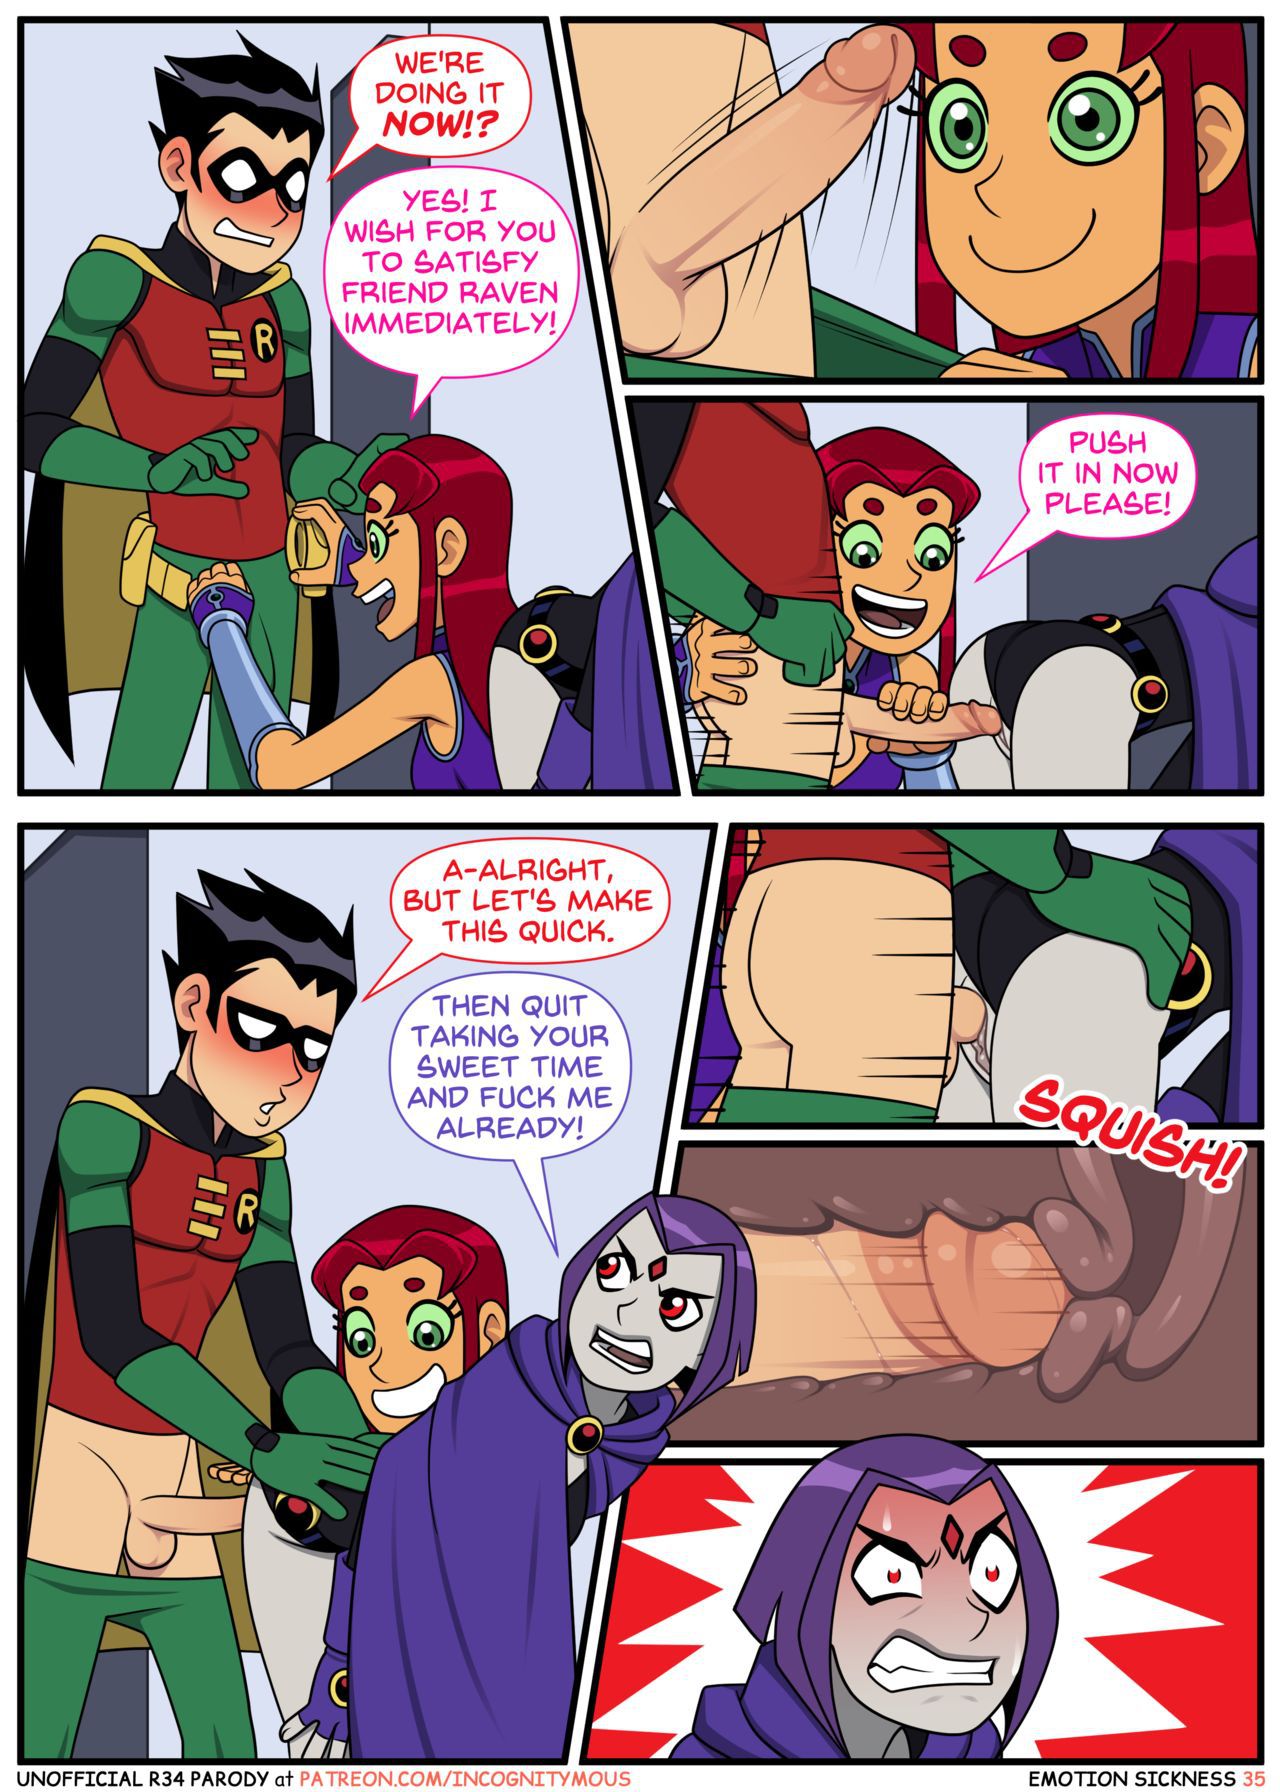 (Incognitymous) Teen Titans - Emotion Sickness(ongoing) 34